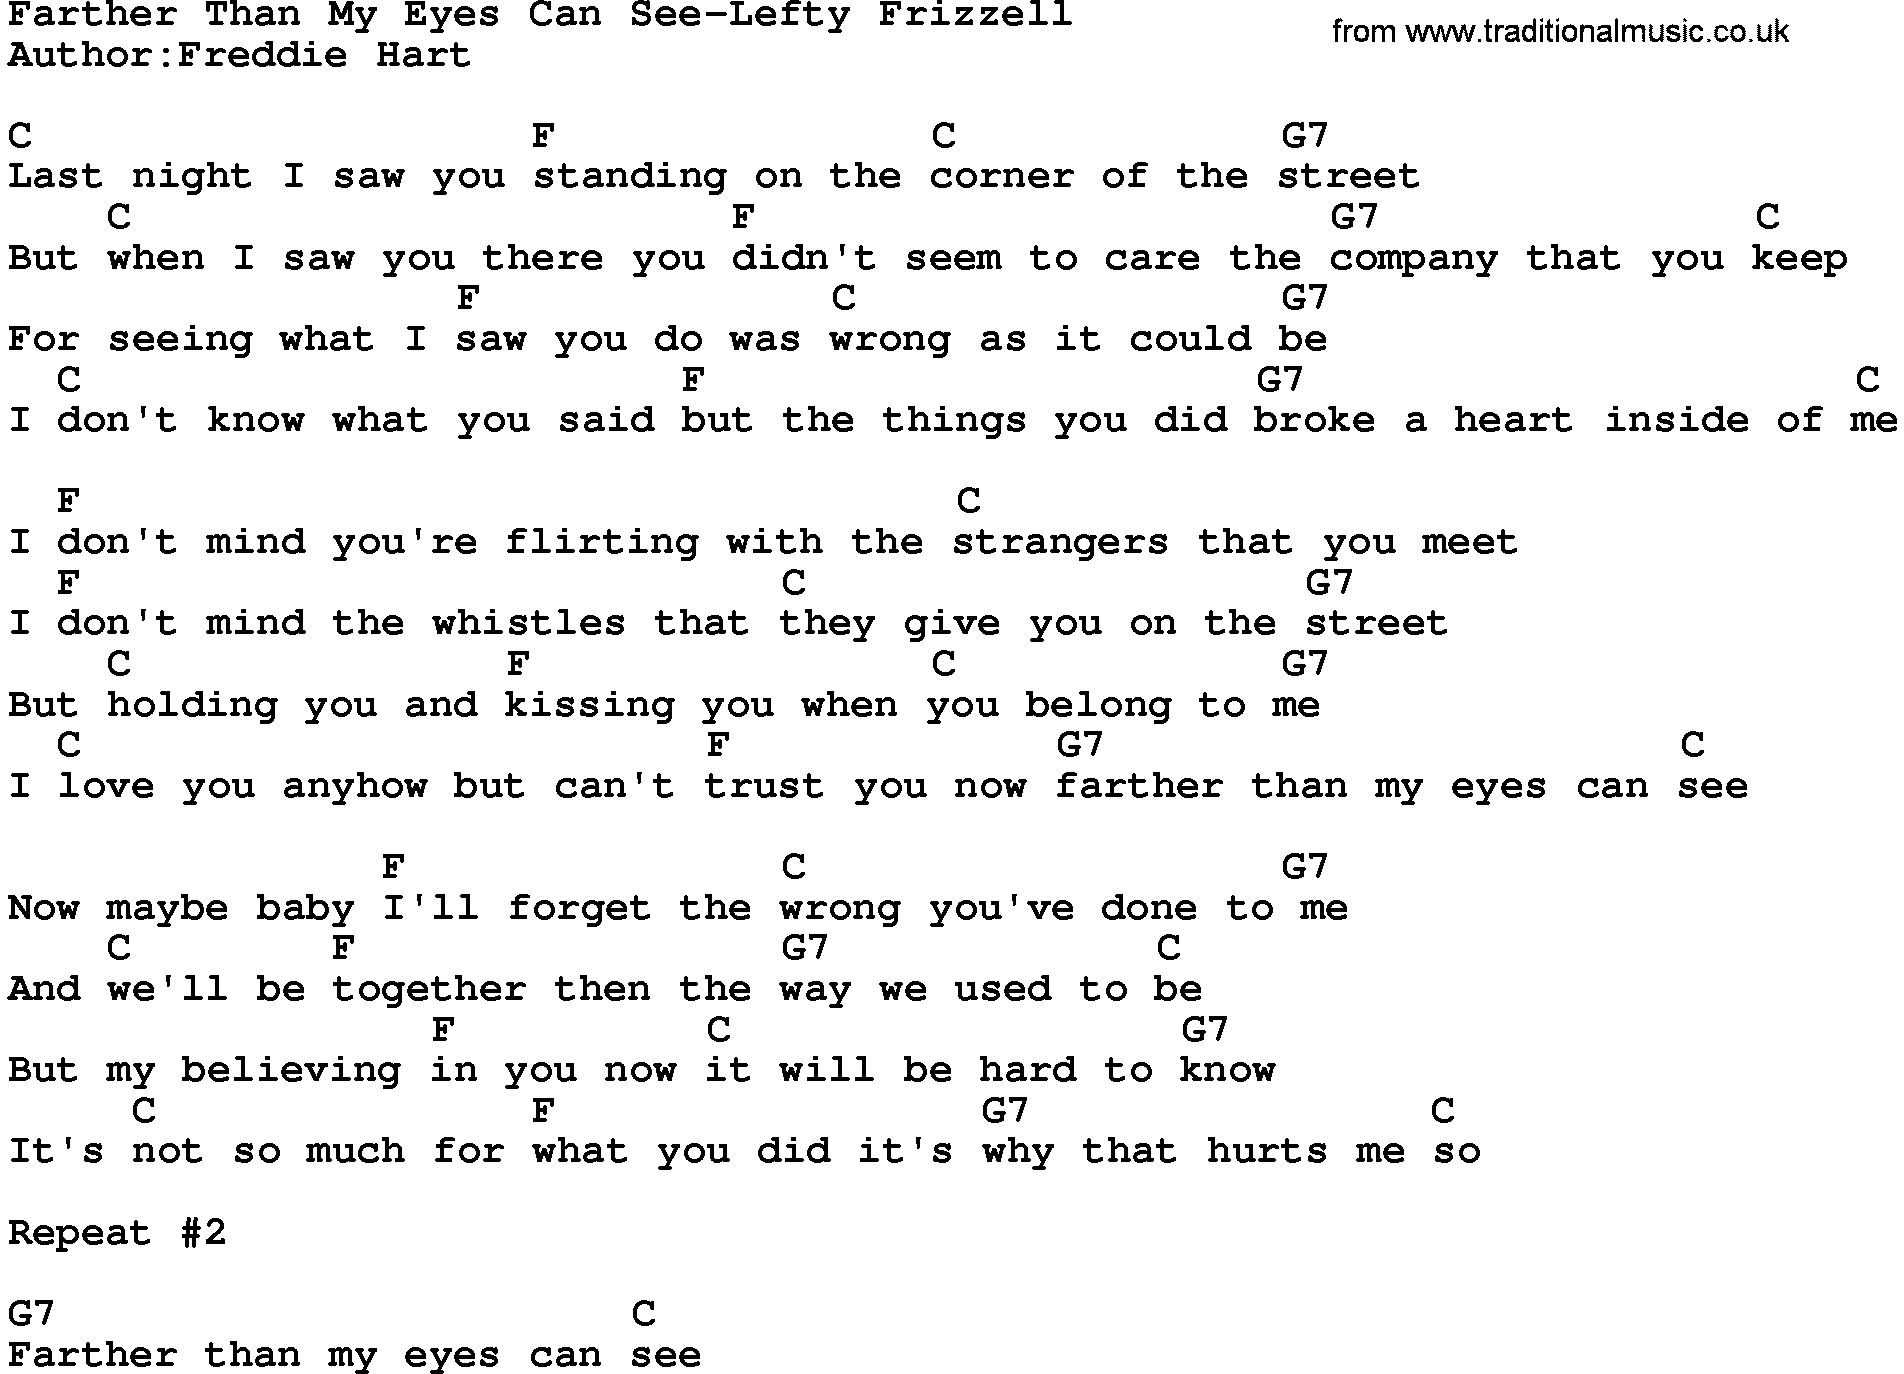 Country music song: Farther Than My Eyes Can See-Lefty Frizzell lyrics and chords